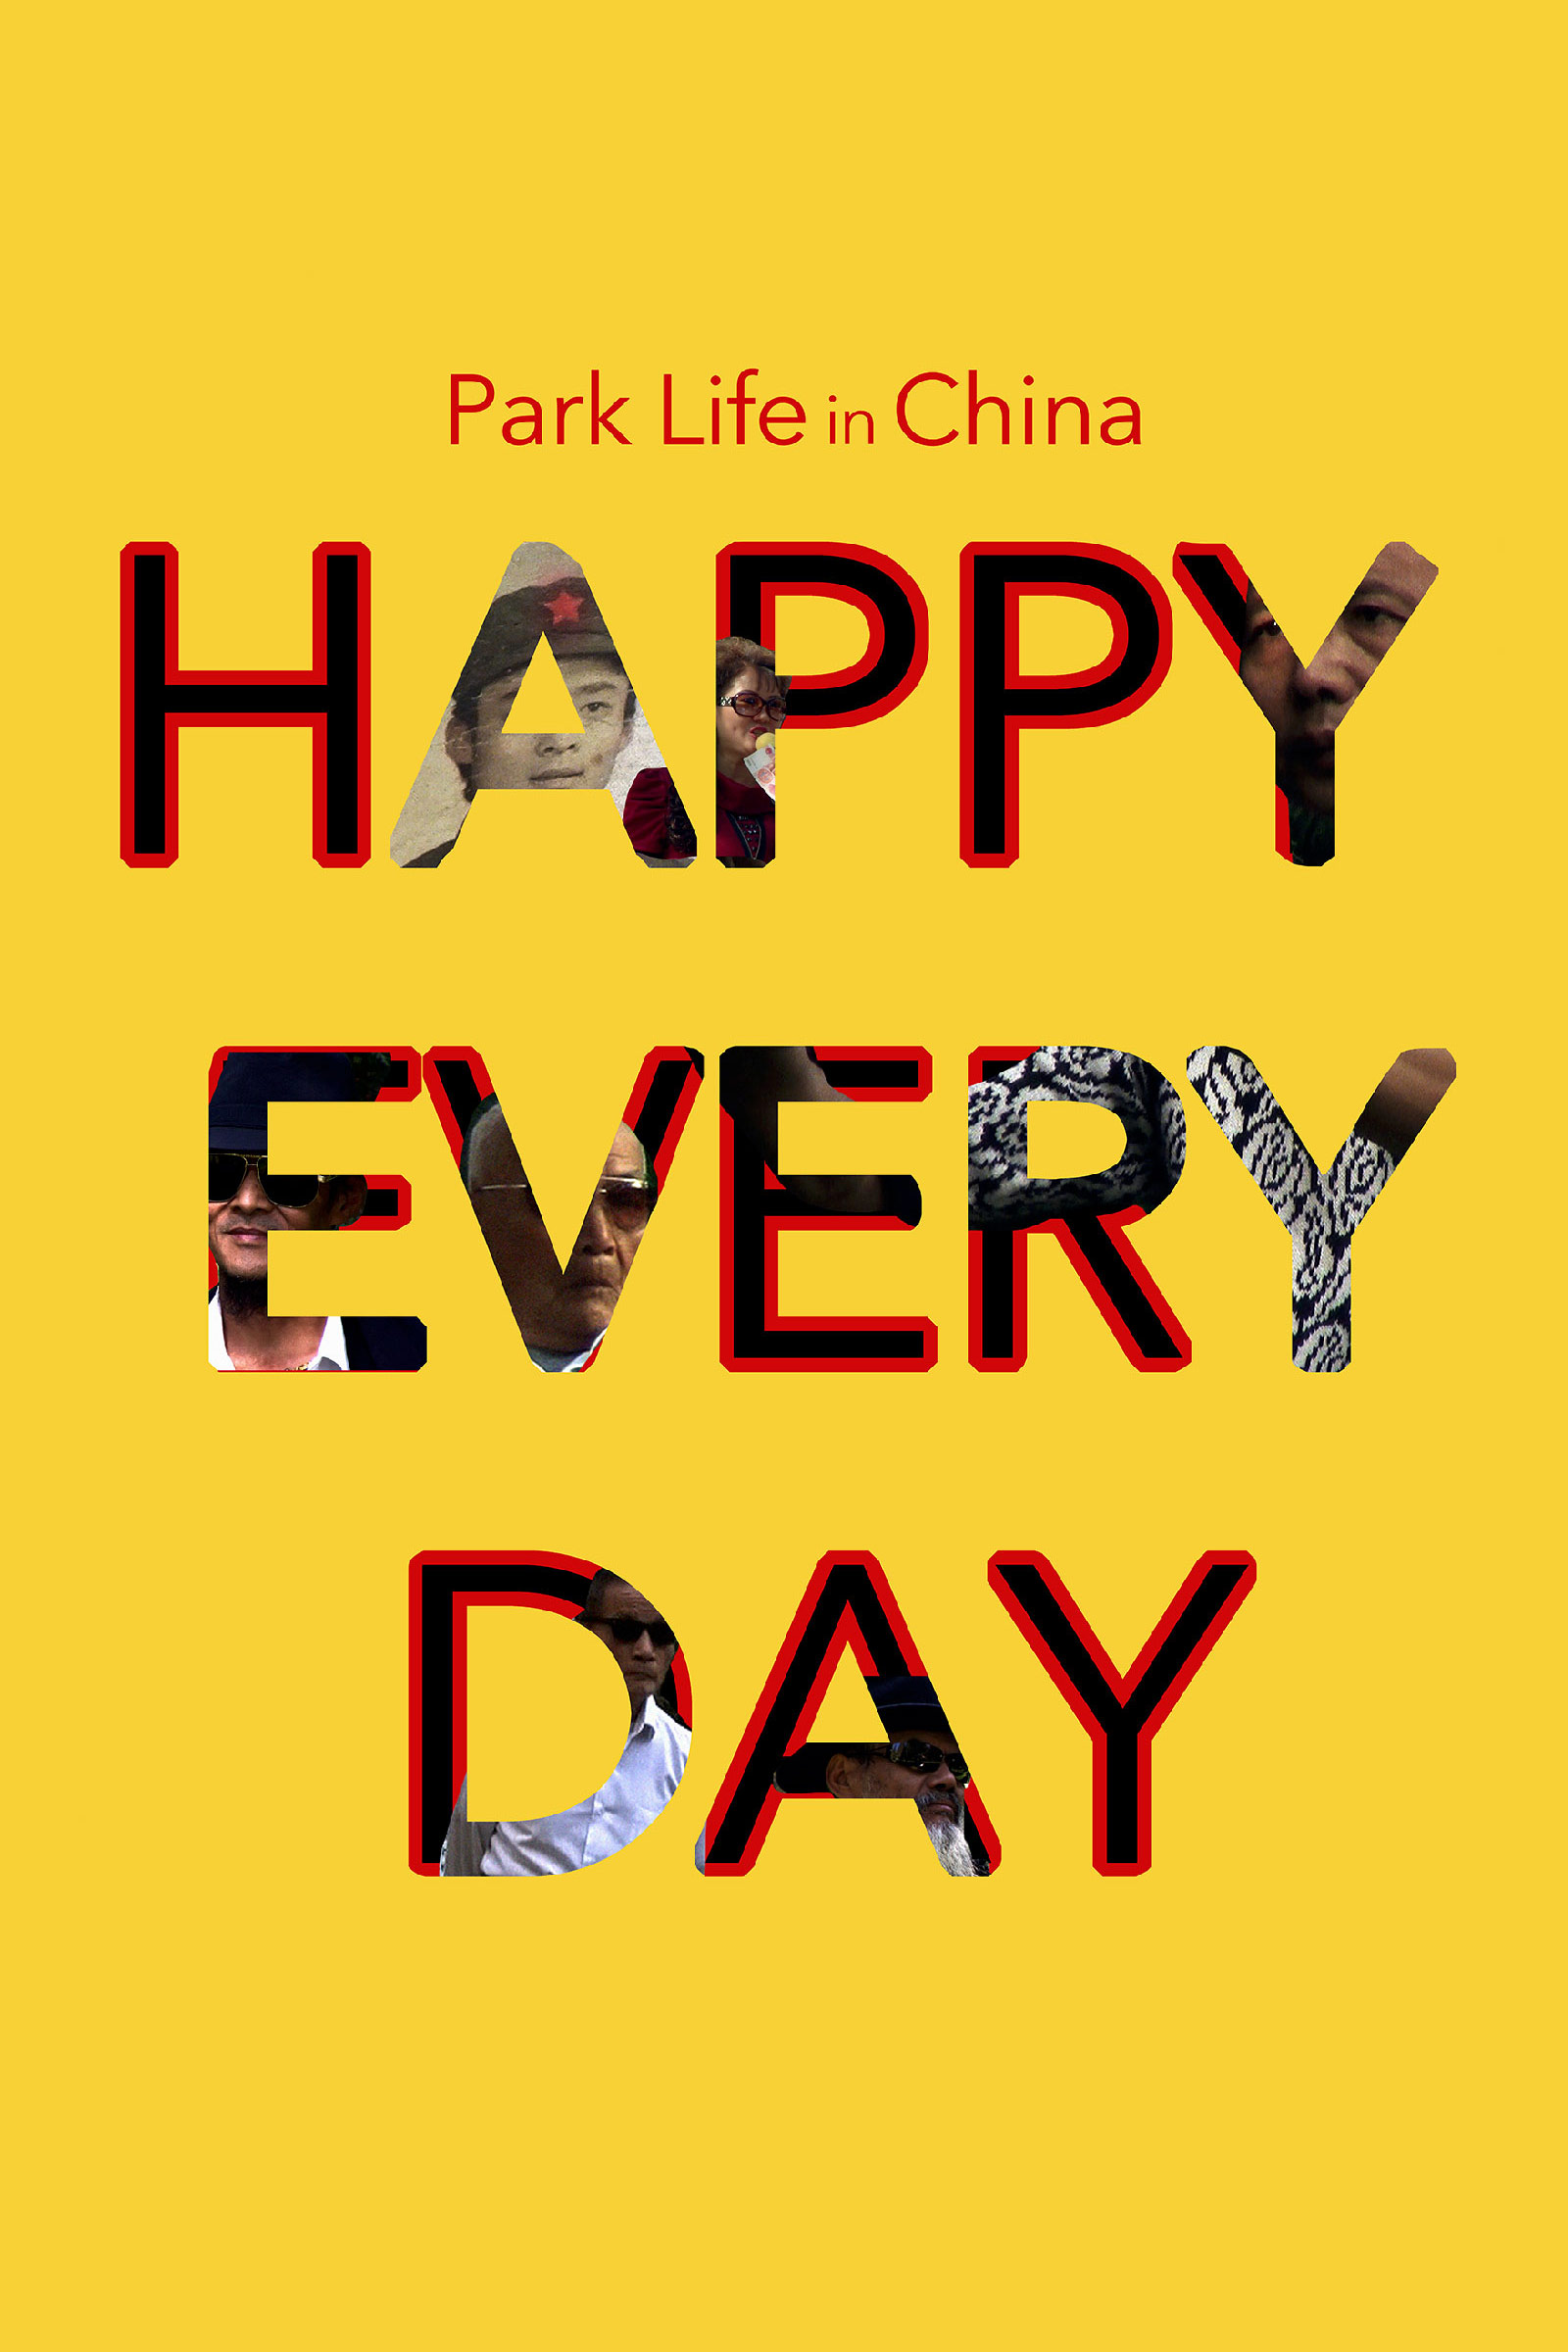 Where to stream Happy Every Day: Park Life in China